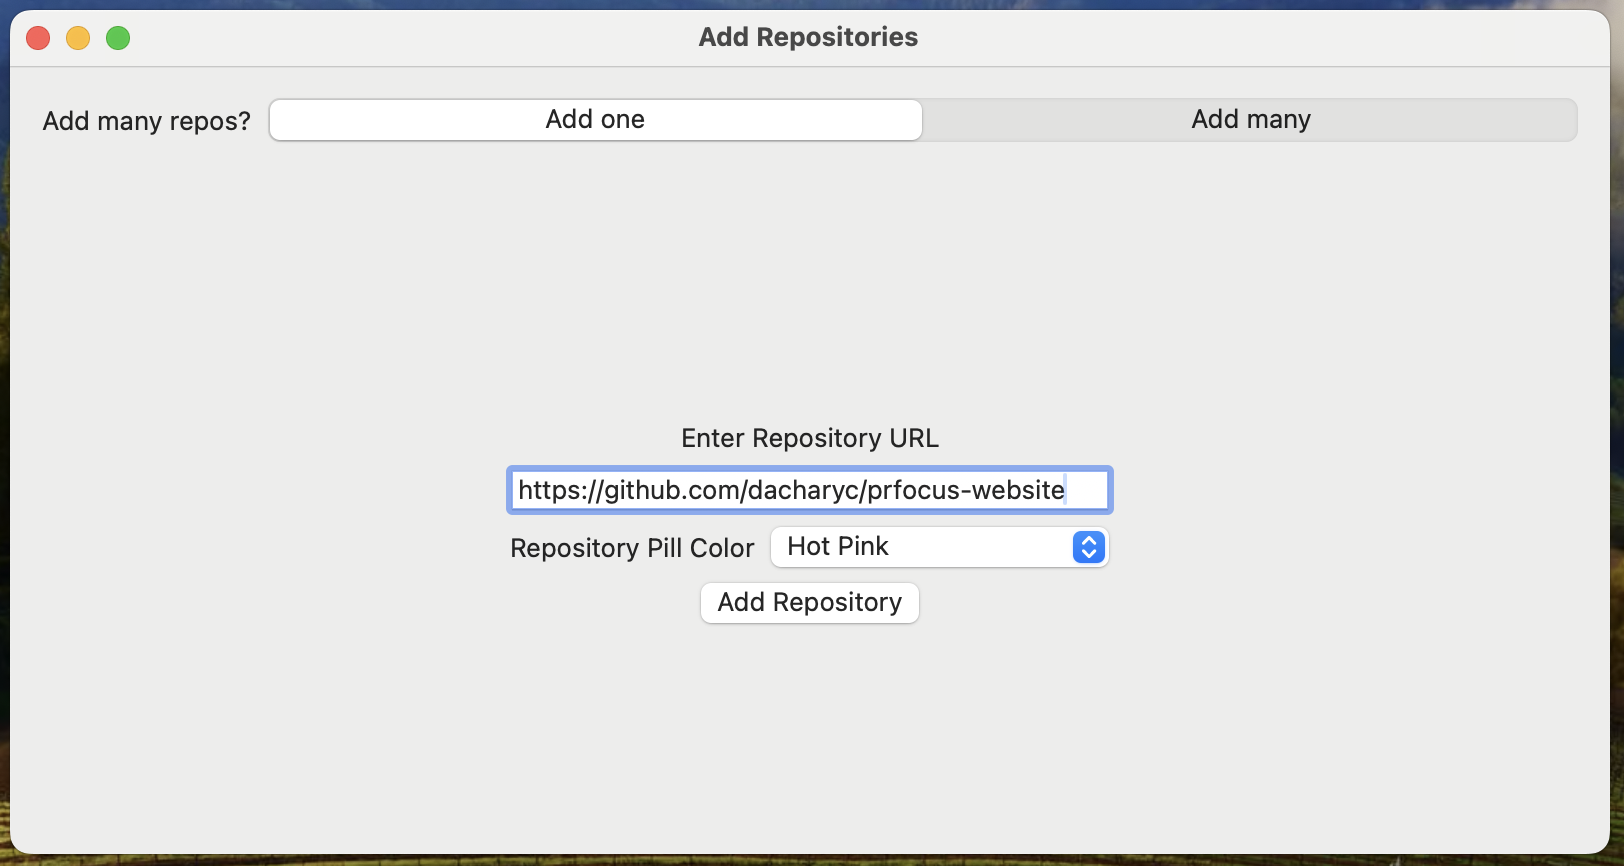 Screenshot showing the &ldquo;Add one&rdquo; option in the &ldquo;Add Repository&rdquo; pane, with a text field to enter a URL, a picker to select a color and a save buttons